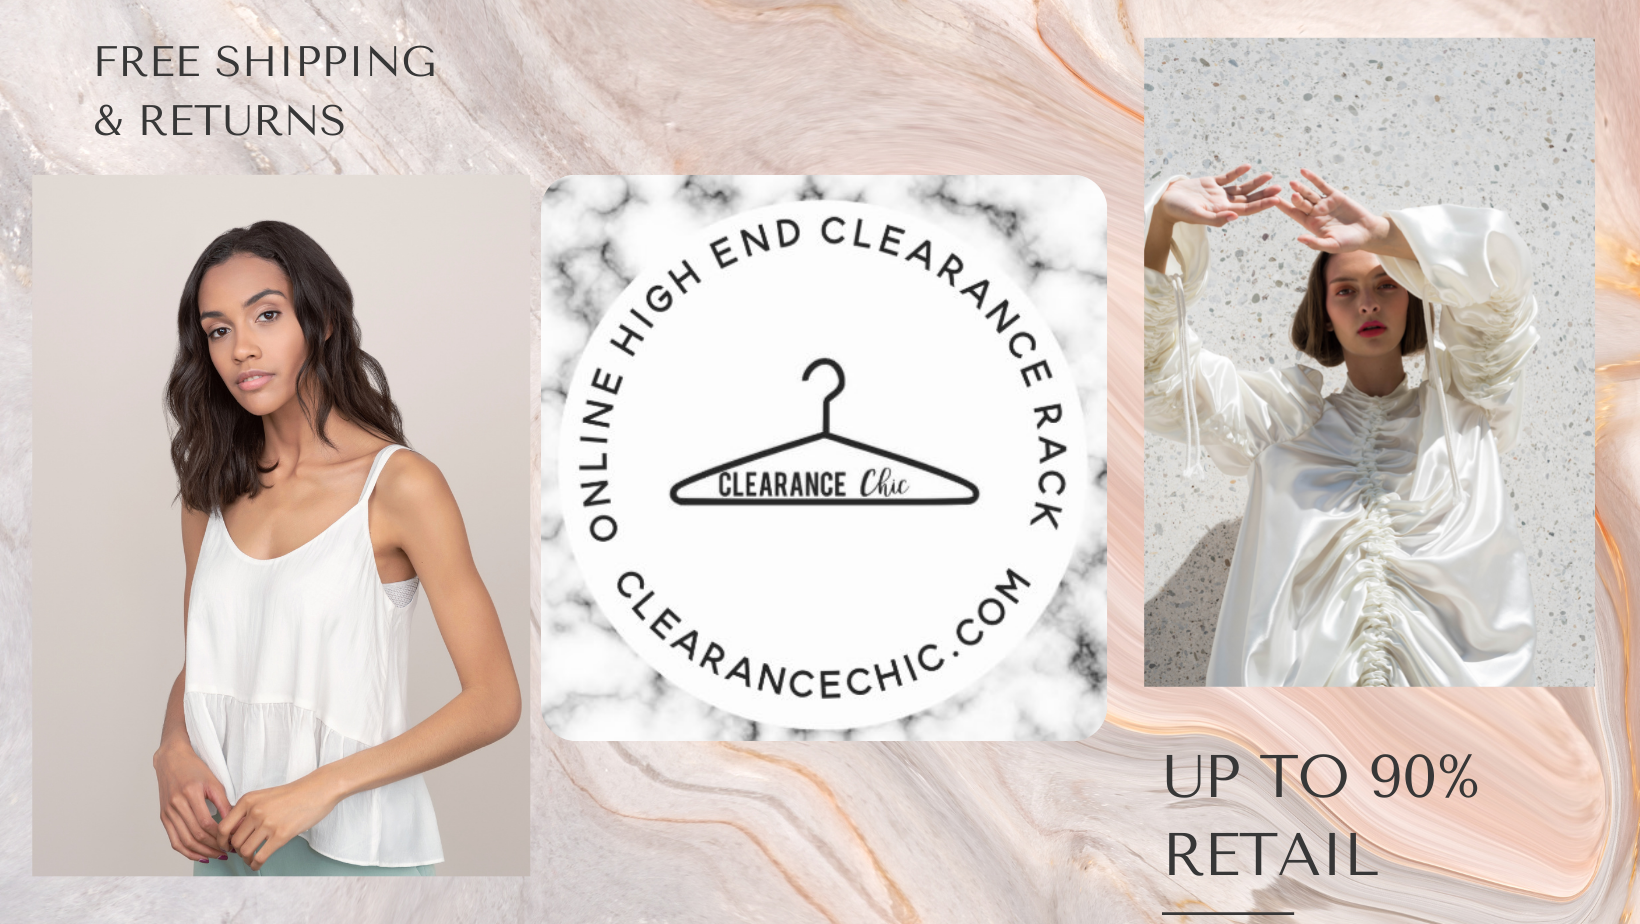 Clearance Chic Online High End Clothing Clearance Rack – CLEARANCE Chic